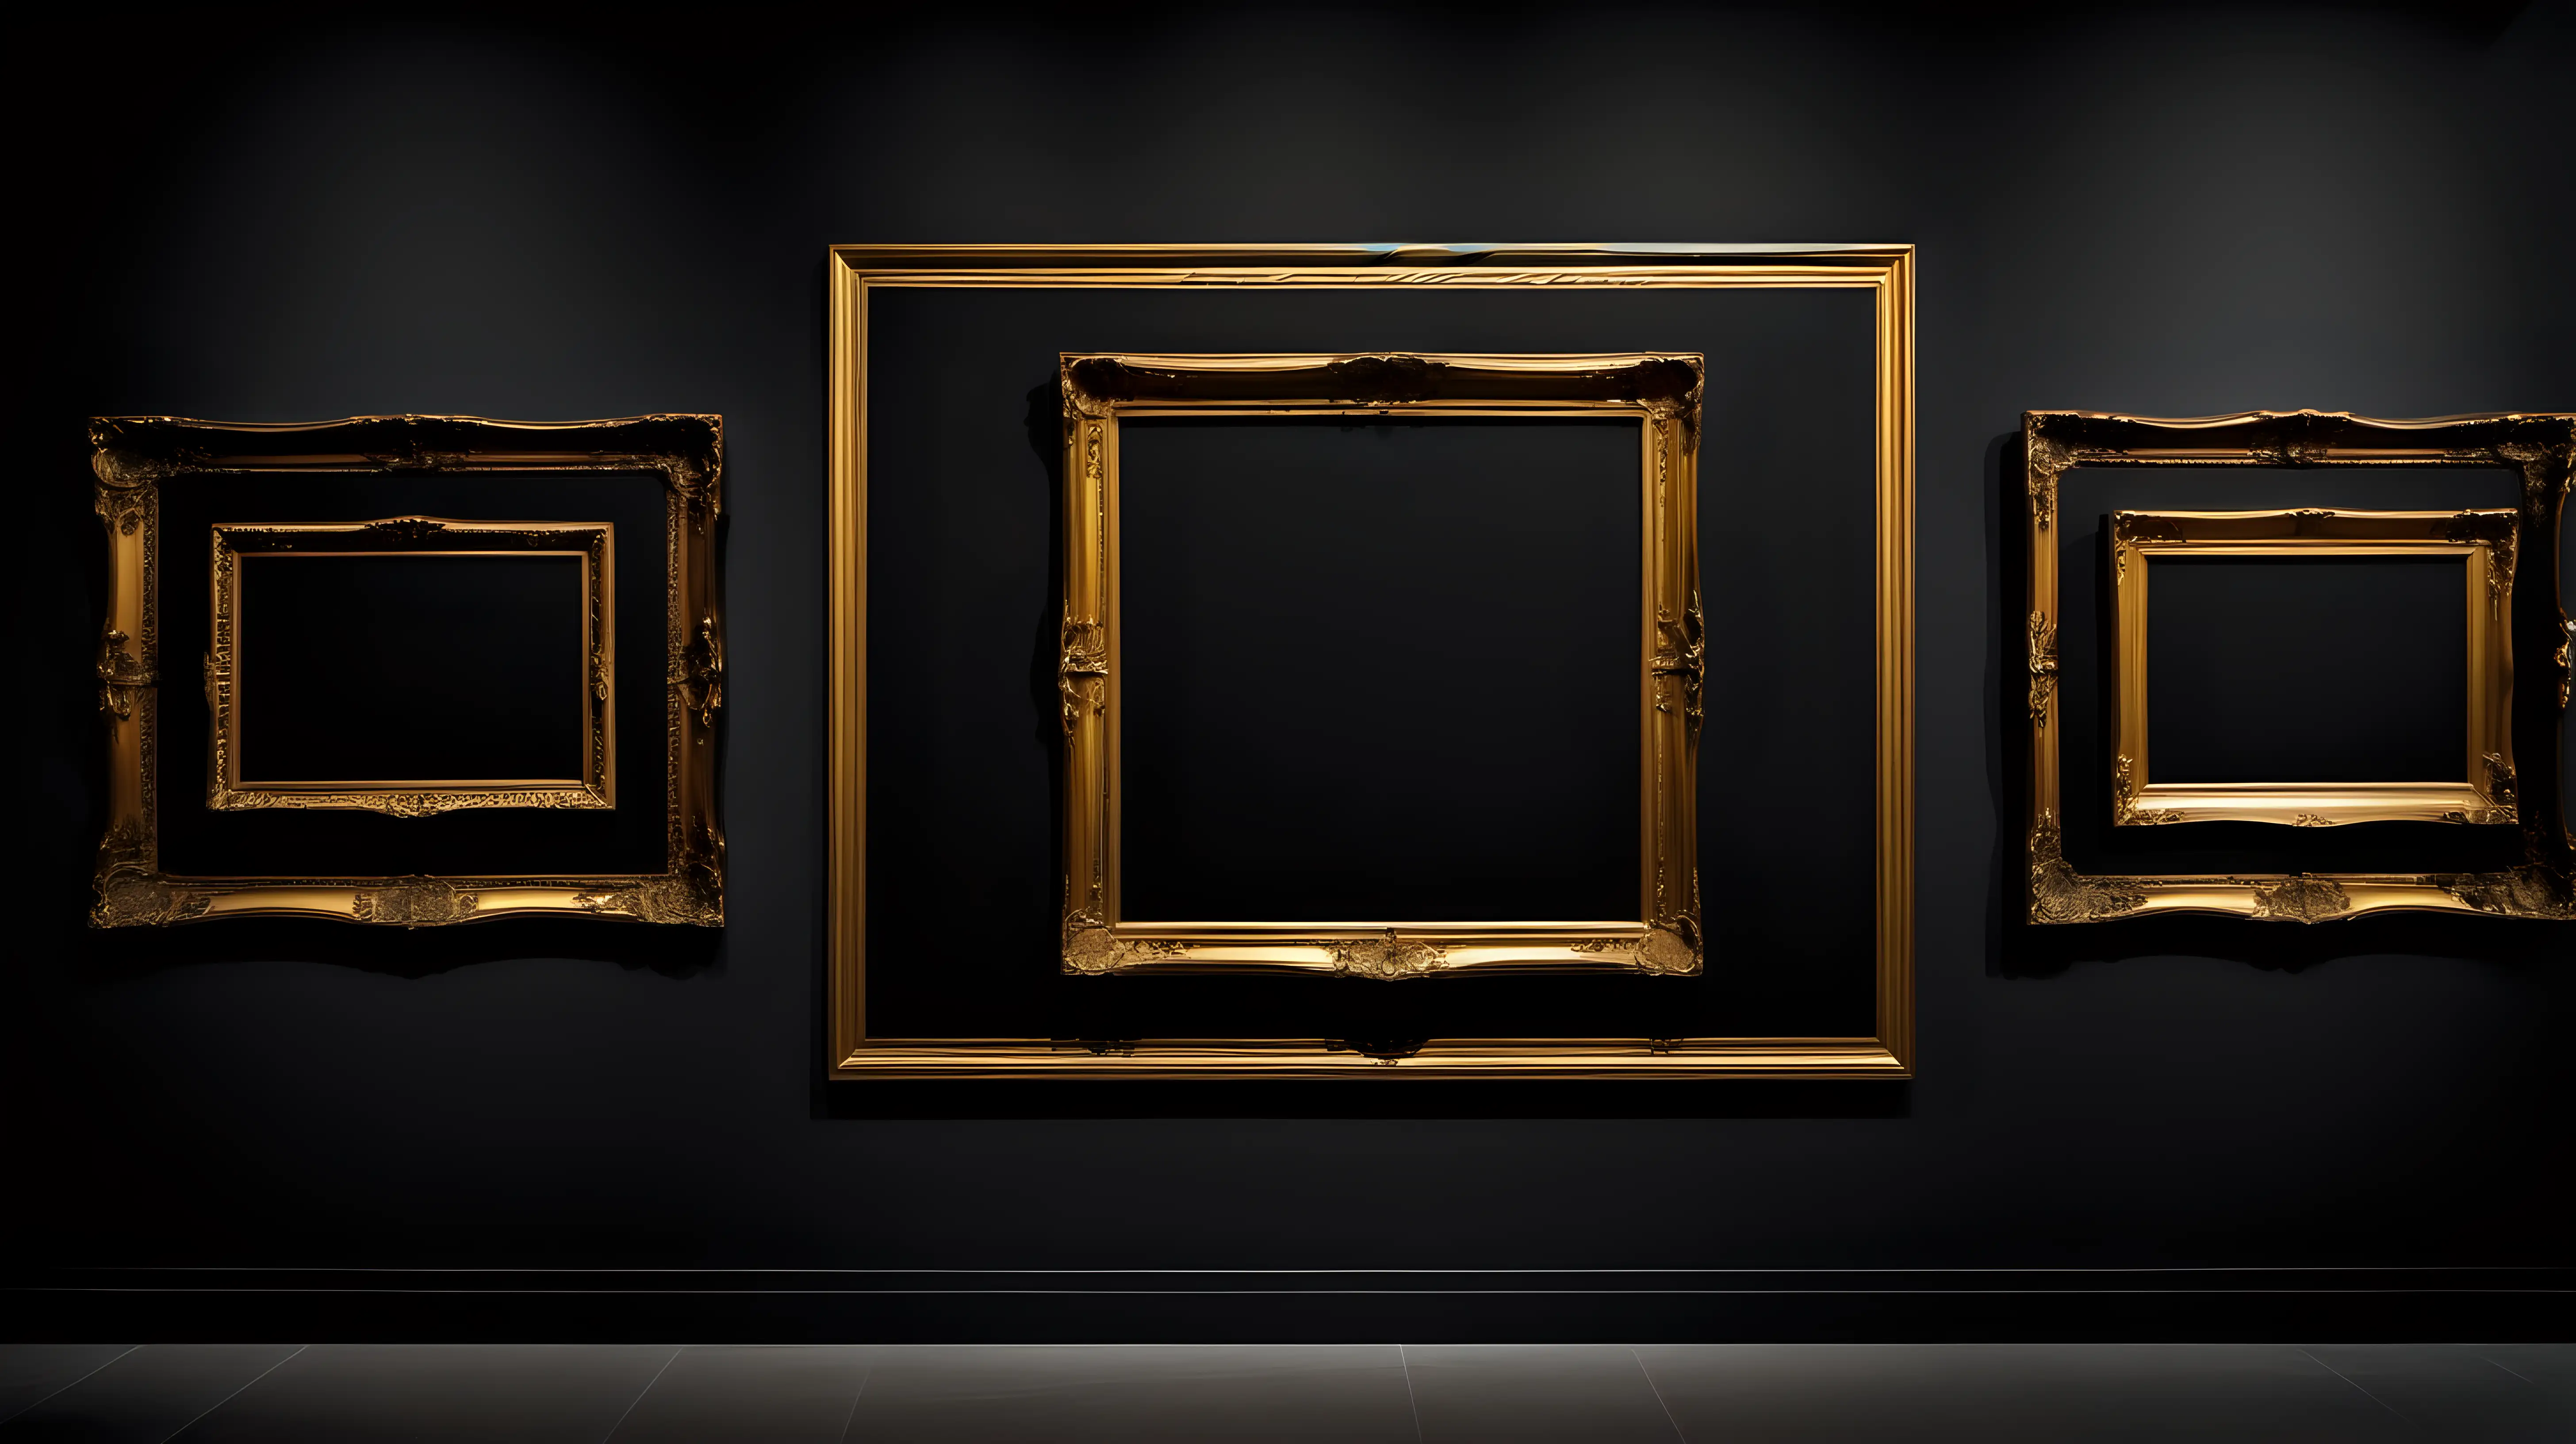 Art Museum dark wall with 3 rectangular horizontal gold frames of solid black paintings
